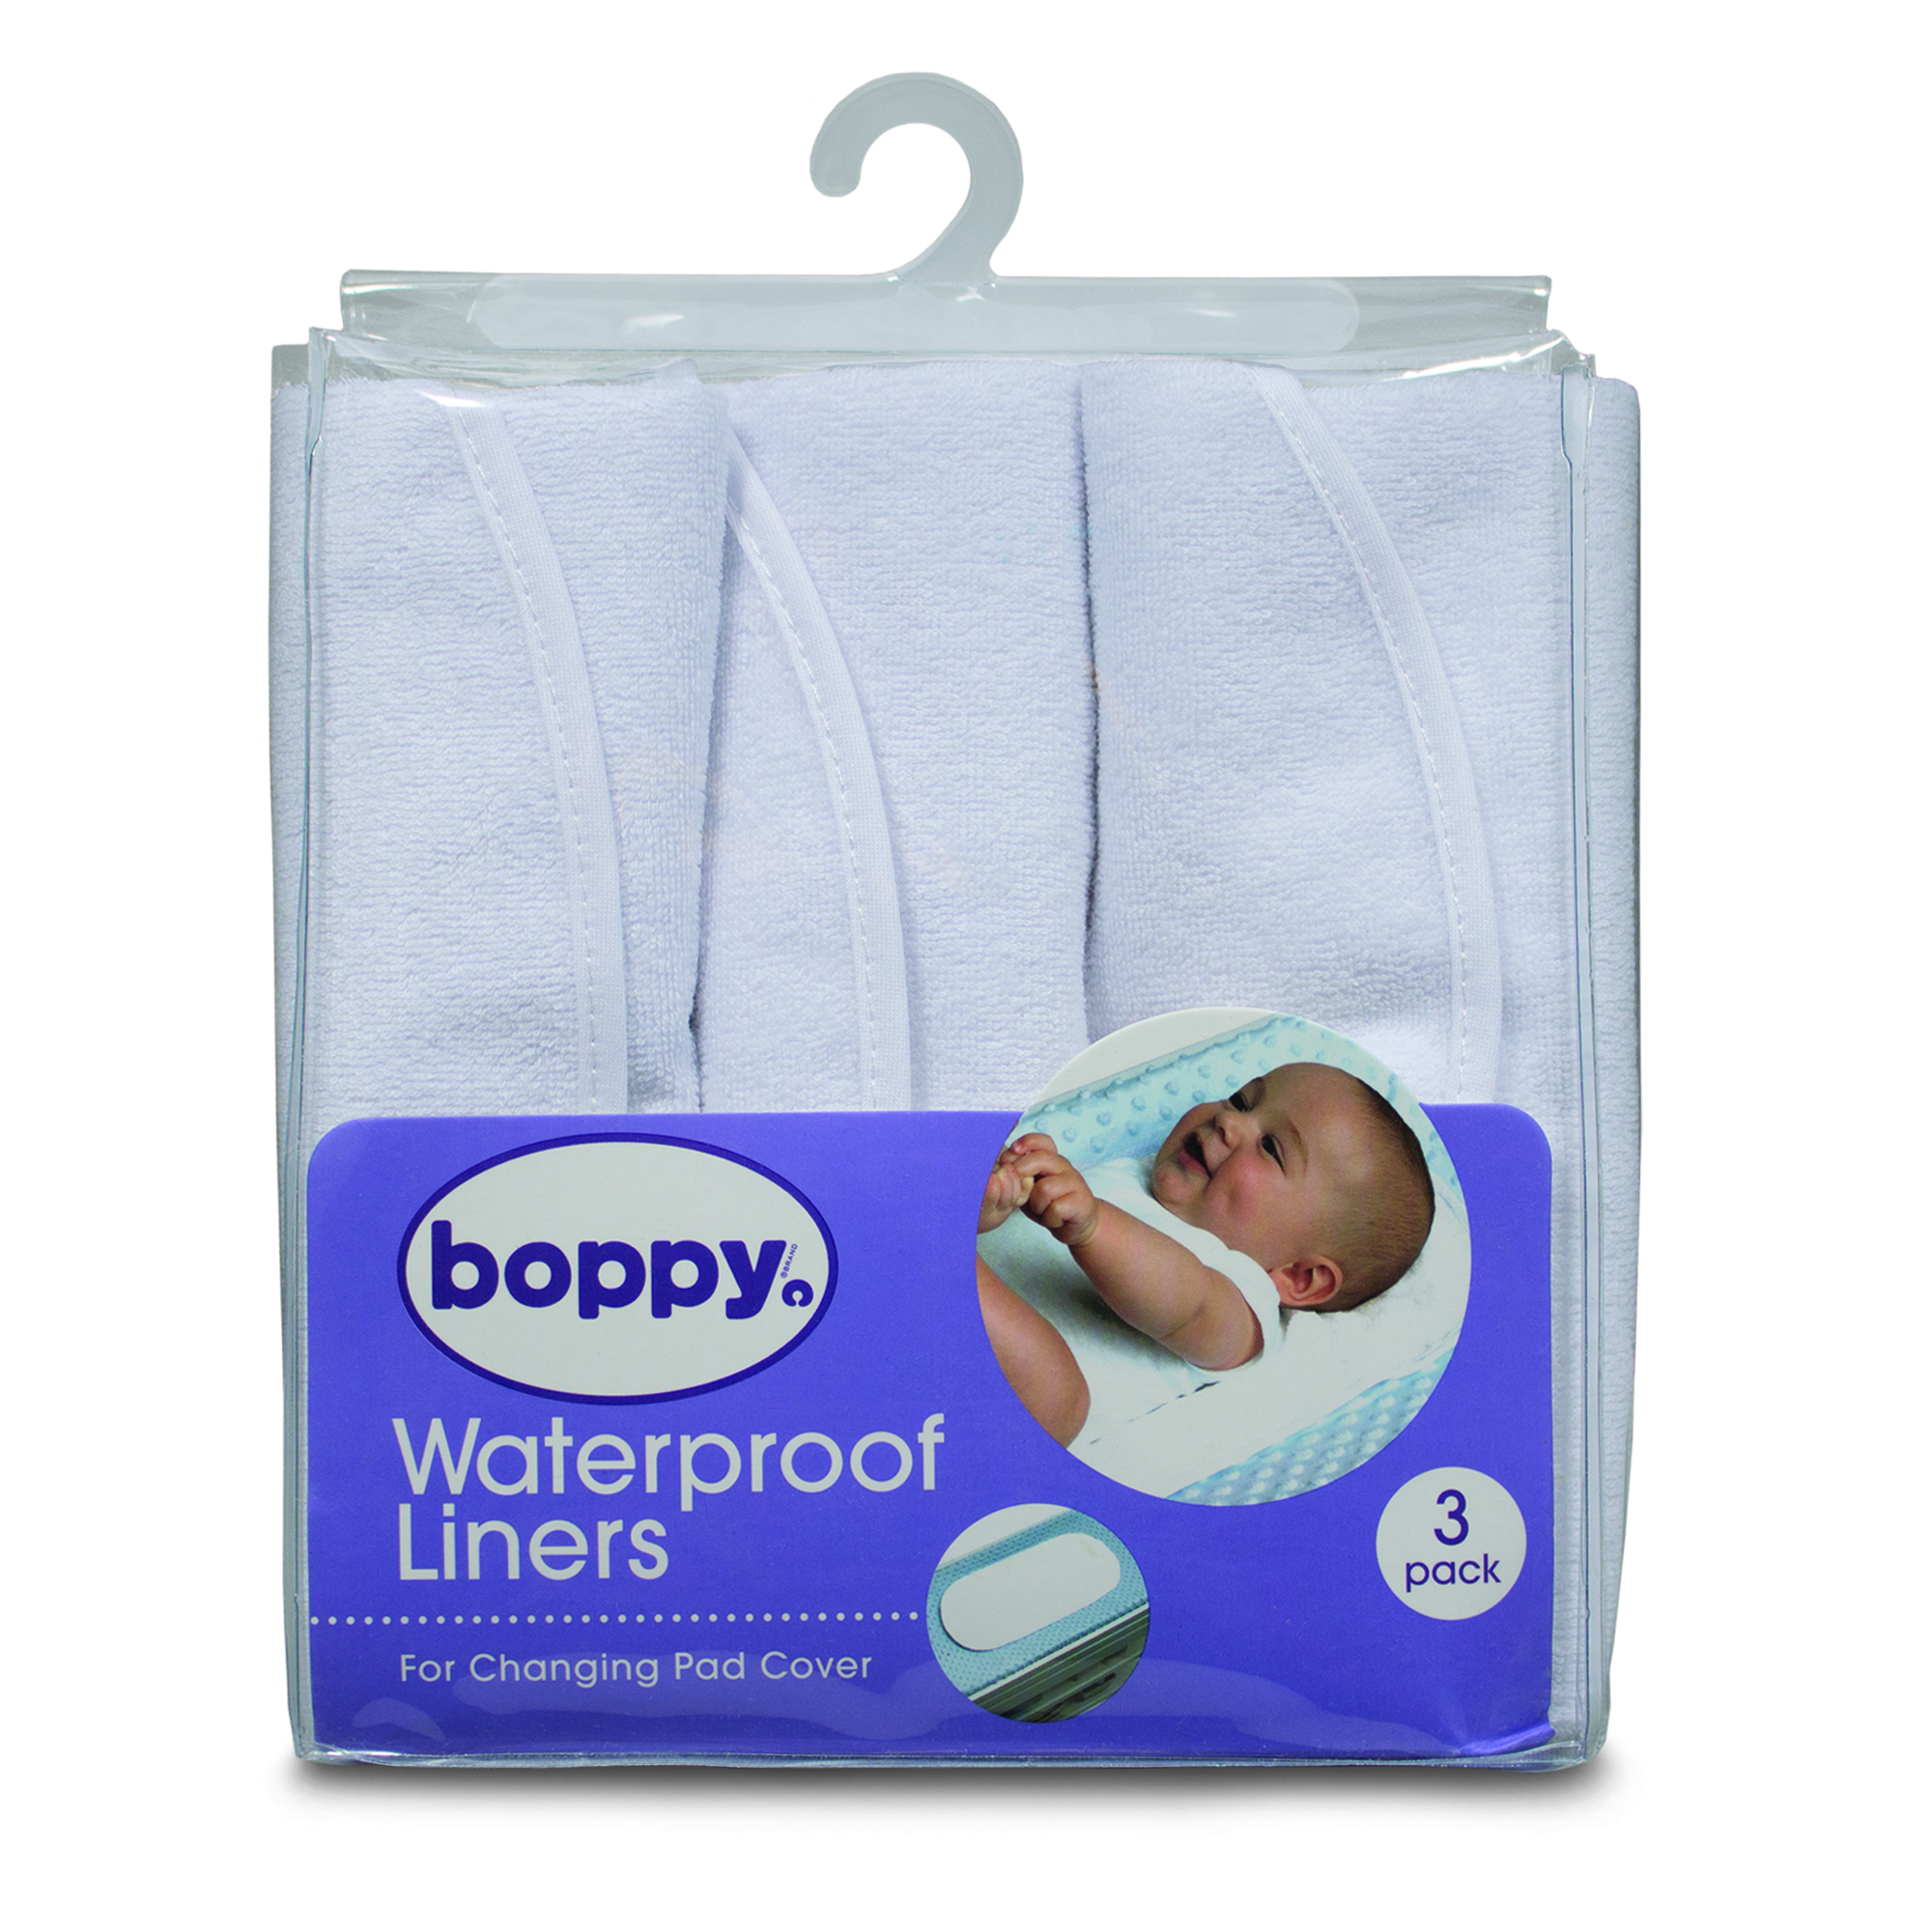 Boppy Changing Pad Liners, Pack of 3, White, Waterproof Backing, Easier Diaper Changes, Machine Washable - image 4 of 8